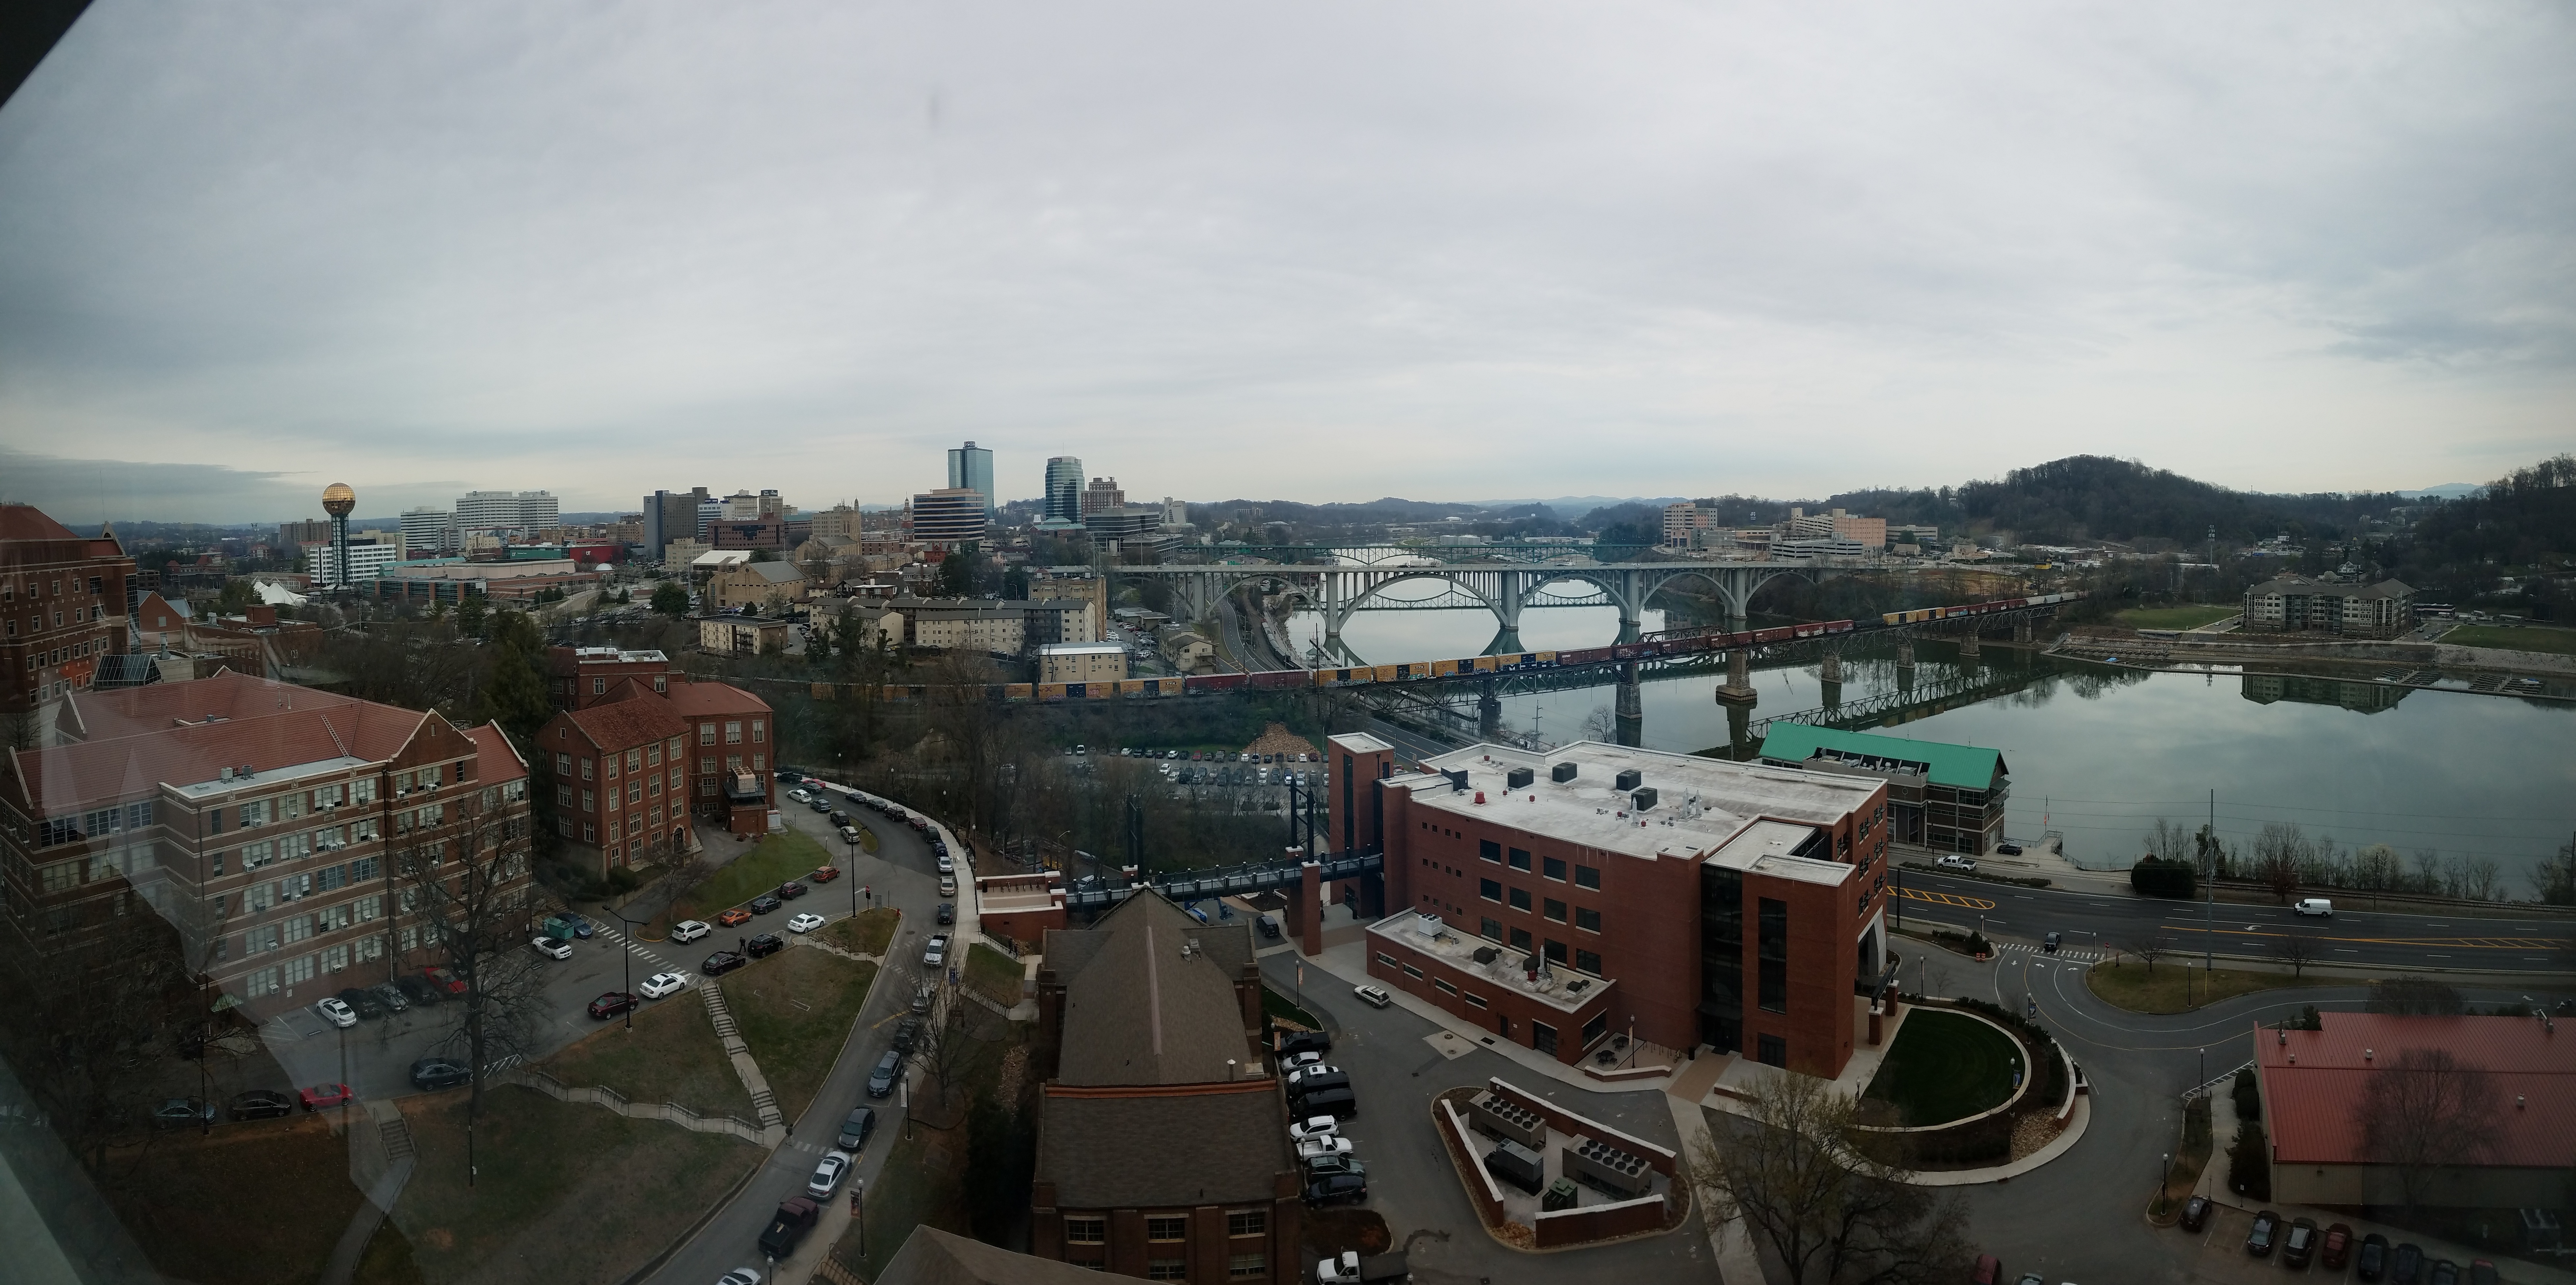 Downtown Knoxville